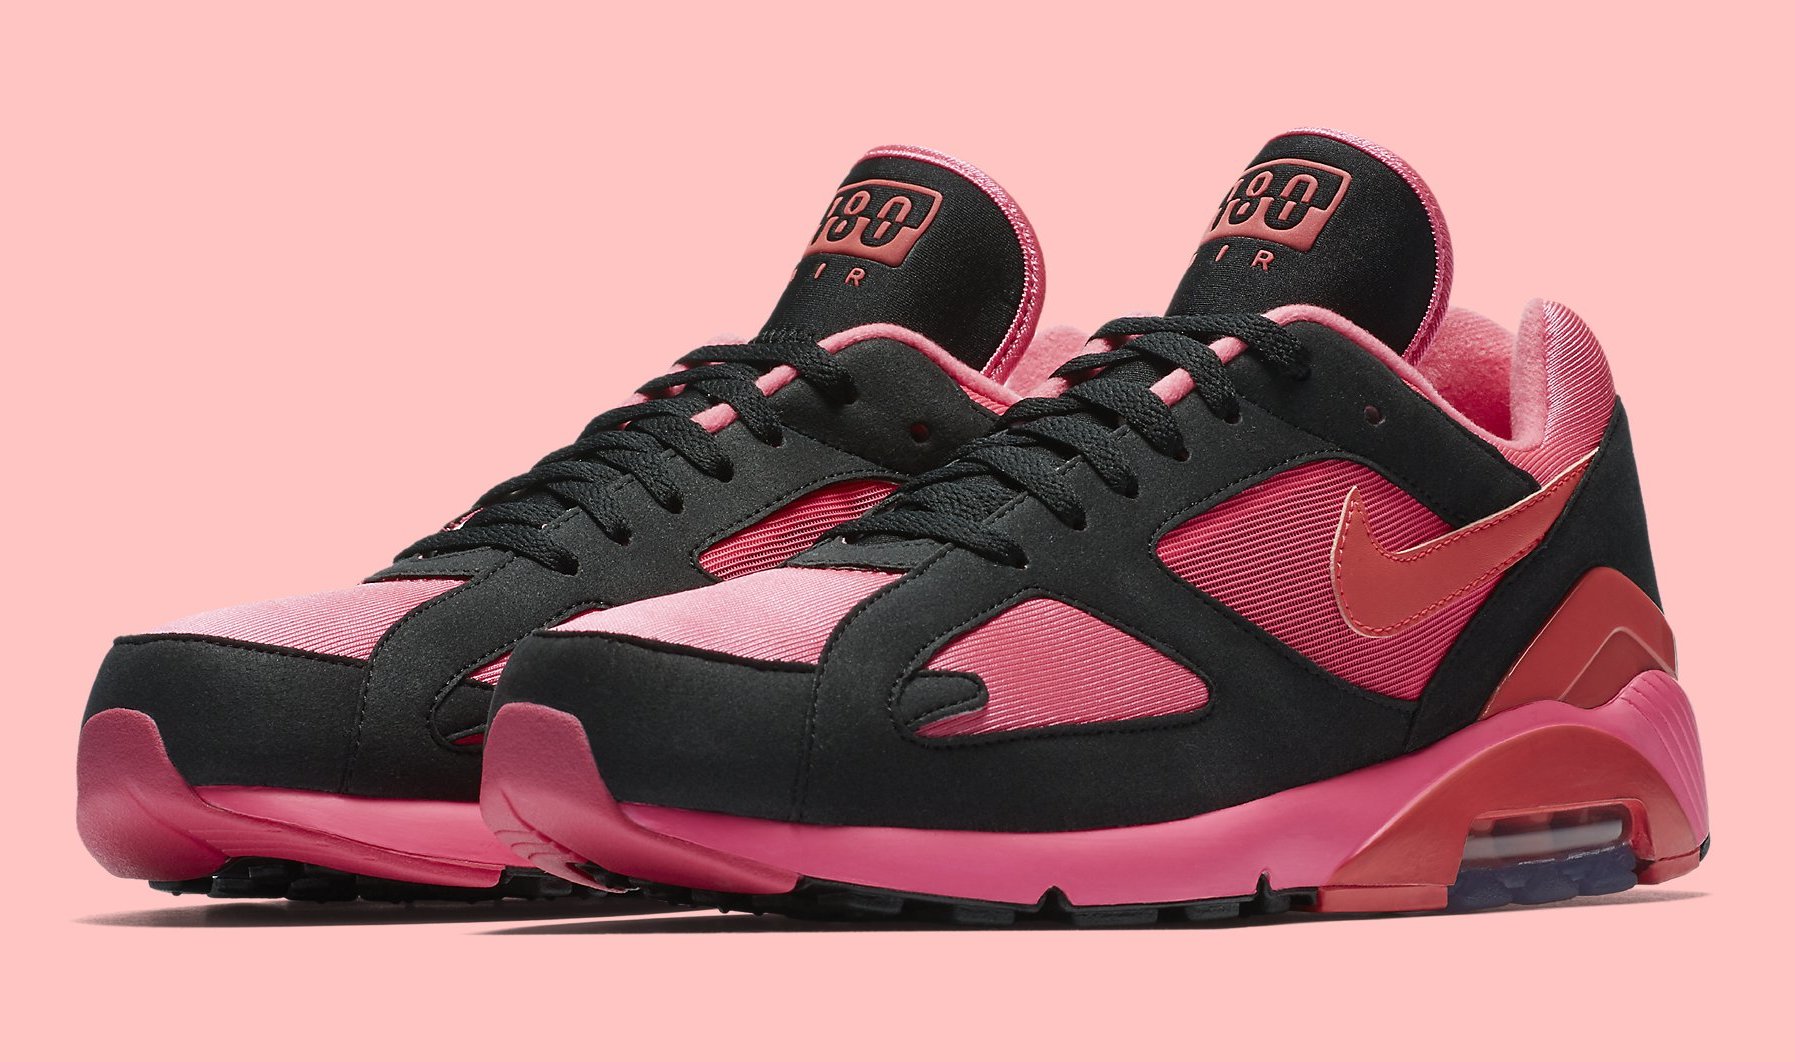 Is Comme des Garçons' Air Max 180 Collab Getting a Wider Release